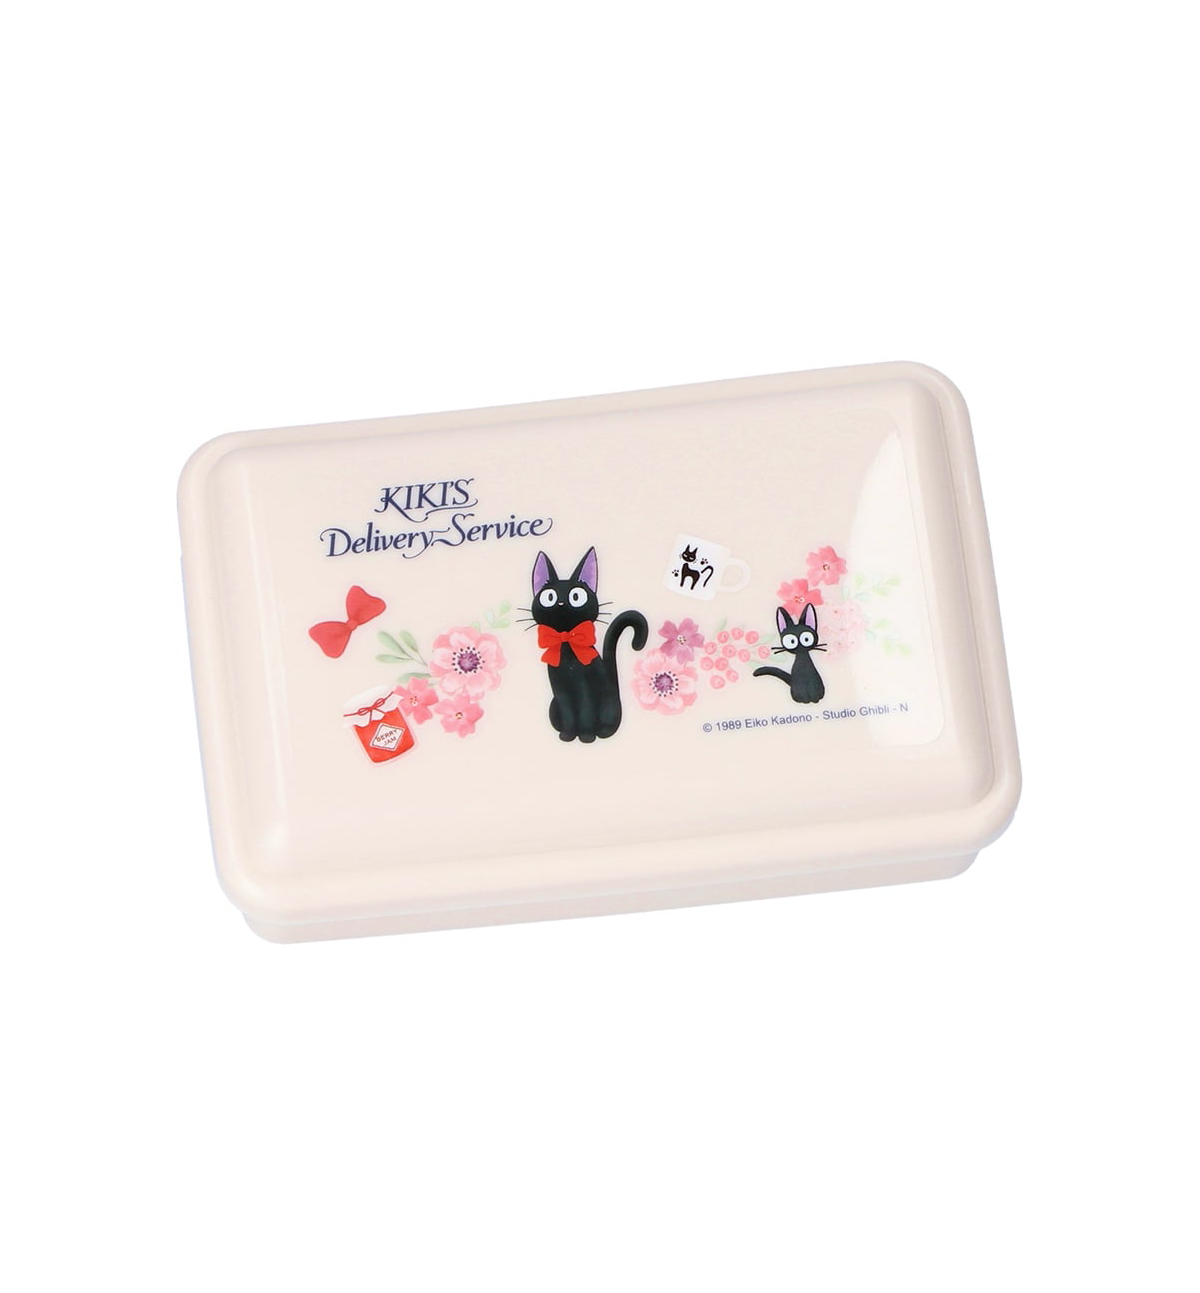 Kiki's Delivery Service Food Container Set [3 Pieces]